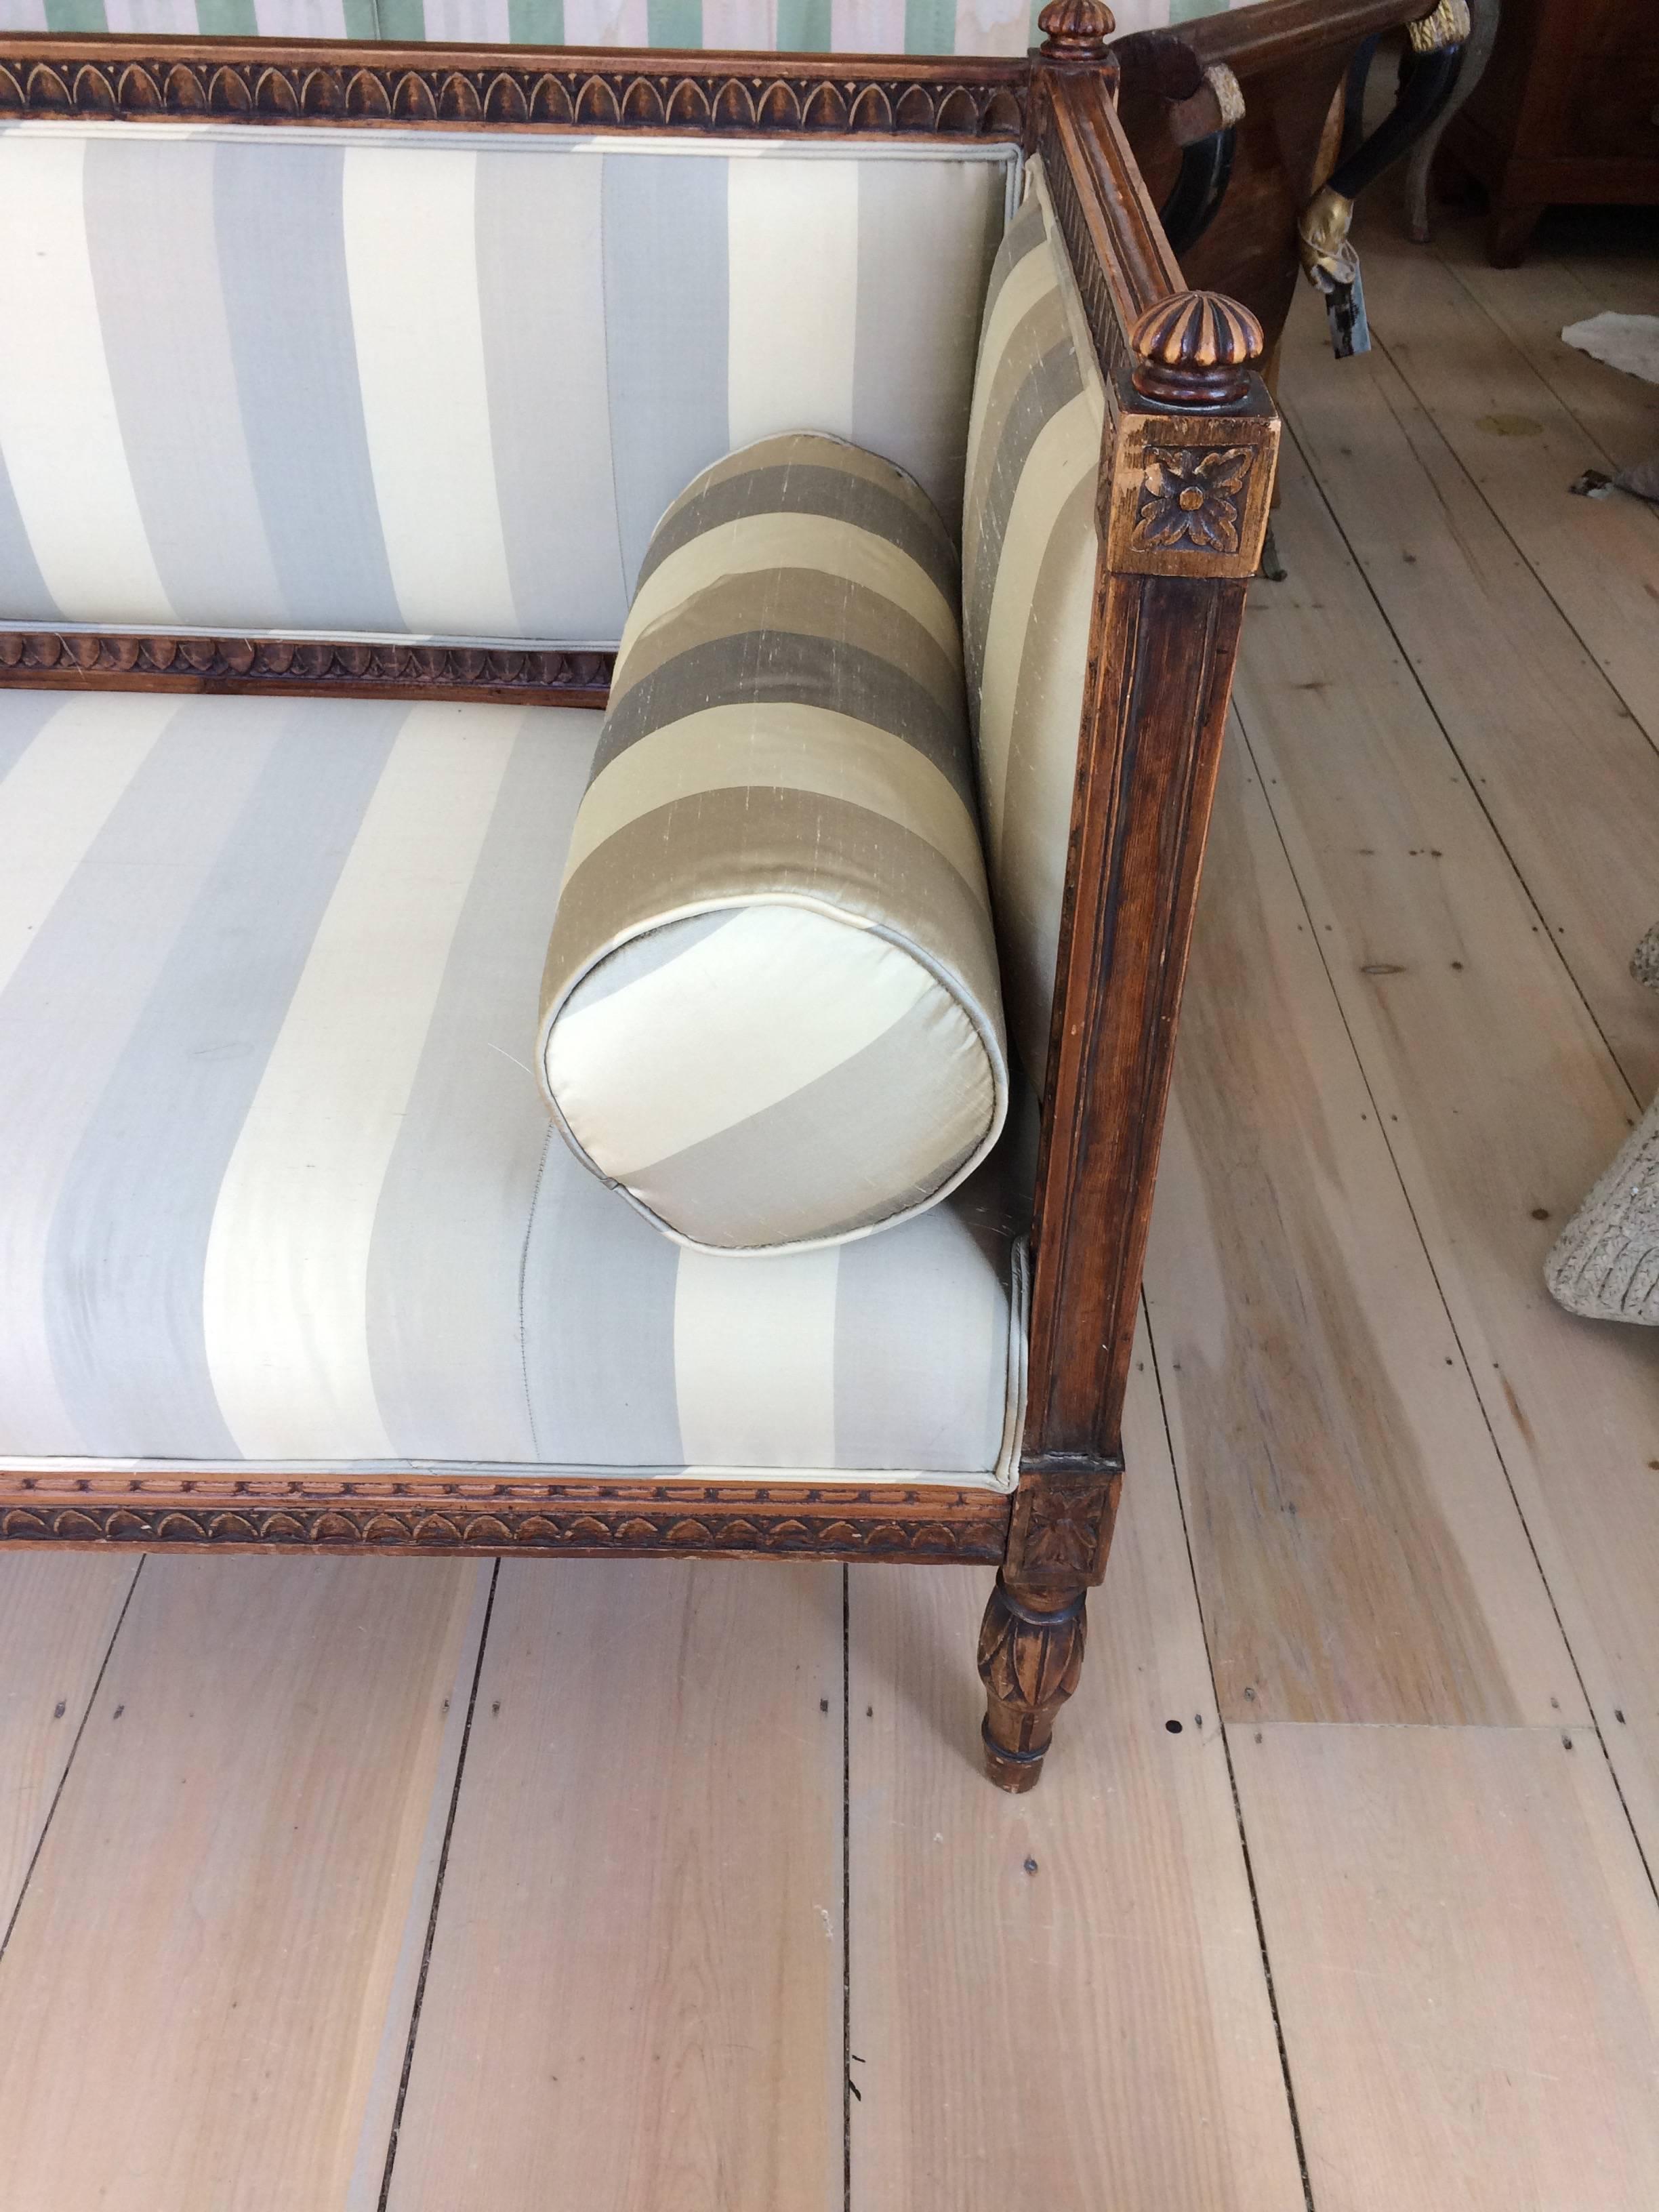 Swedish Gustavian sofa – never been painted! A Swedish period Gustavian 19th century sofa upholstered in silk striped fabric. 
Measures: height of back 33.25; to finial 34.25
seat depth 23.